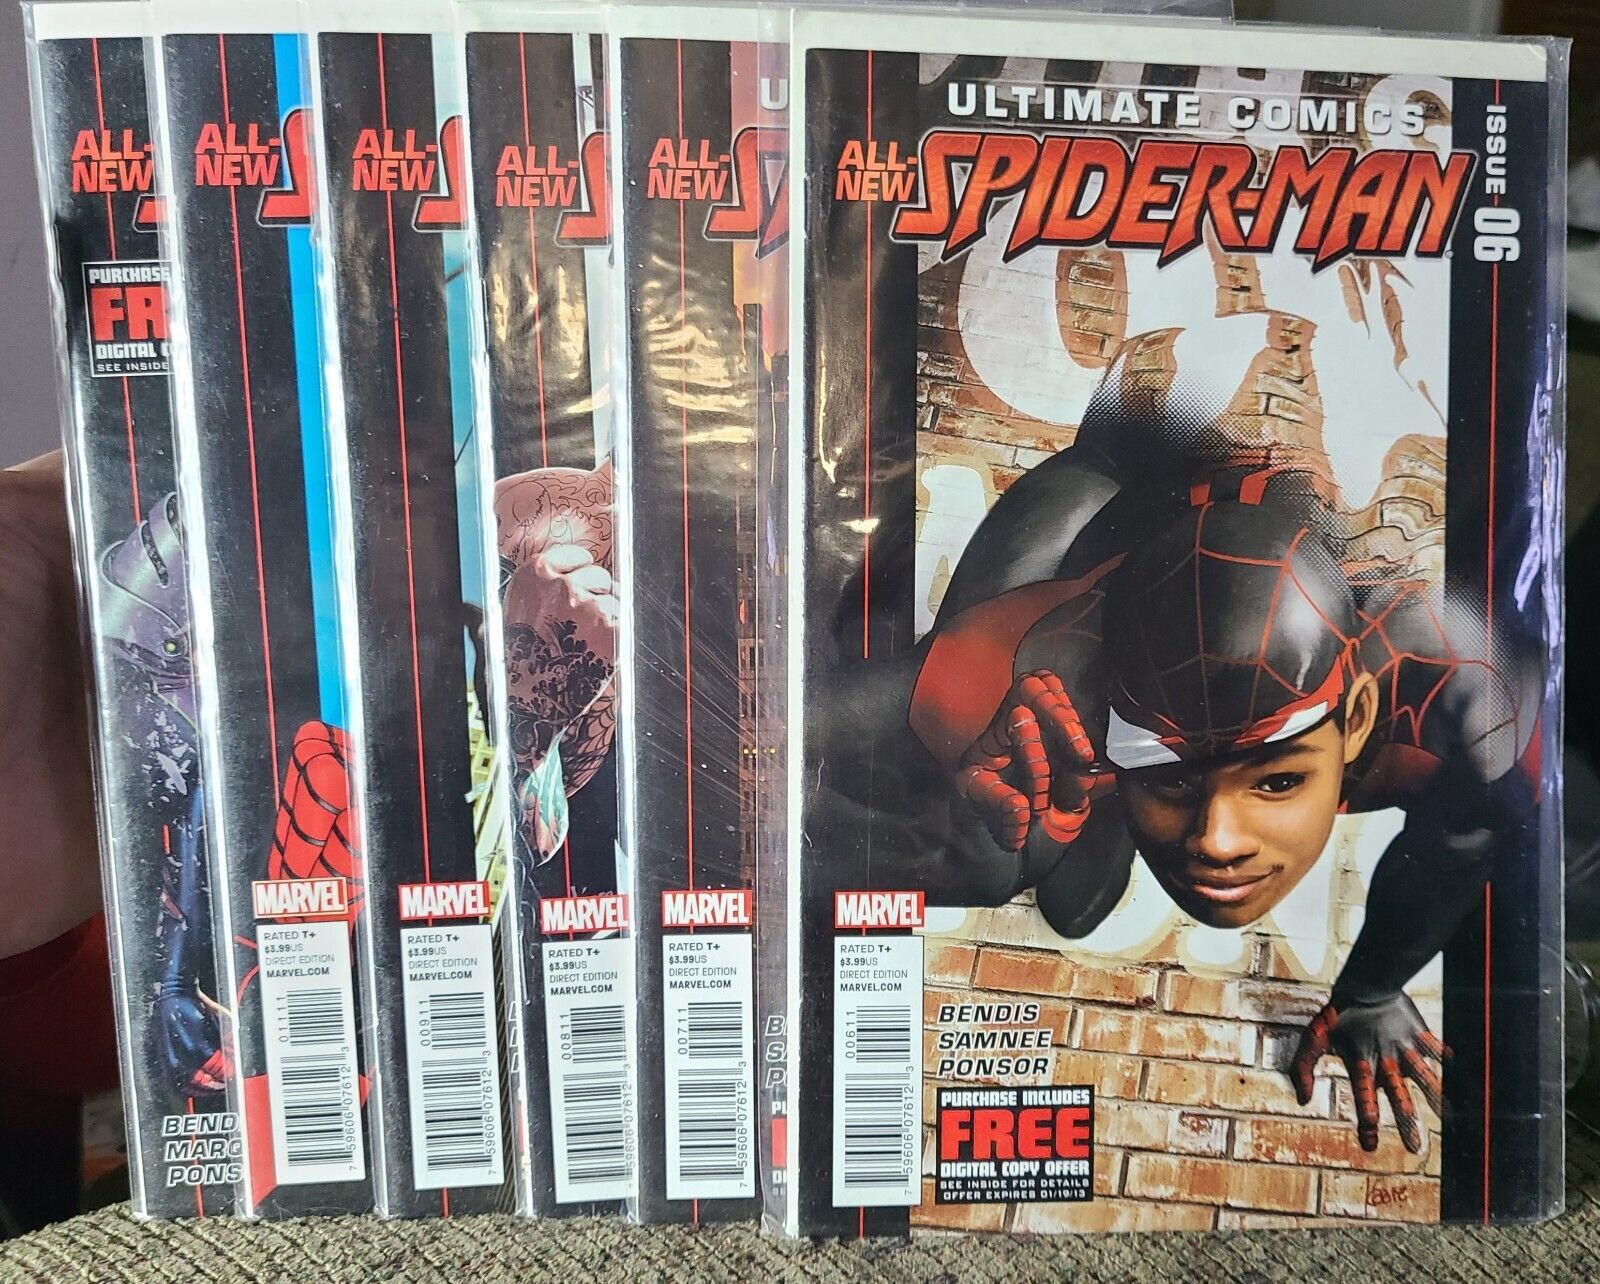 2012 Marvel Ultimate Comics All New Spider-Man #6-#12 1st Print🔥 Iconic Covers!